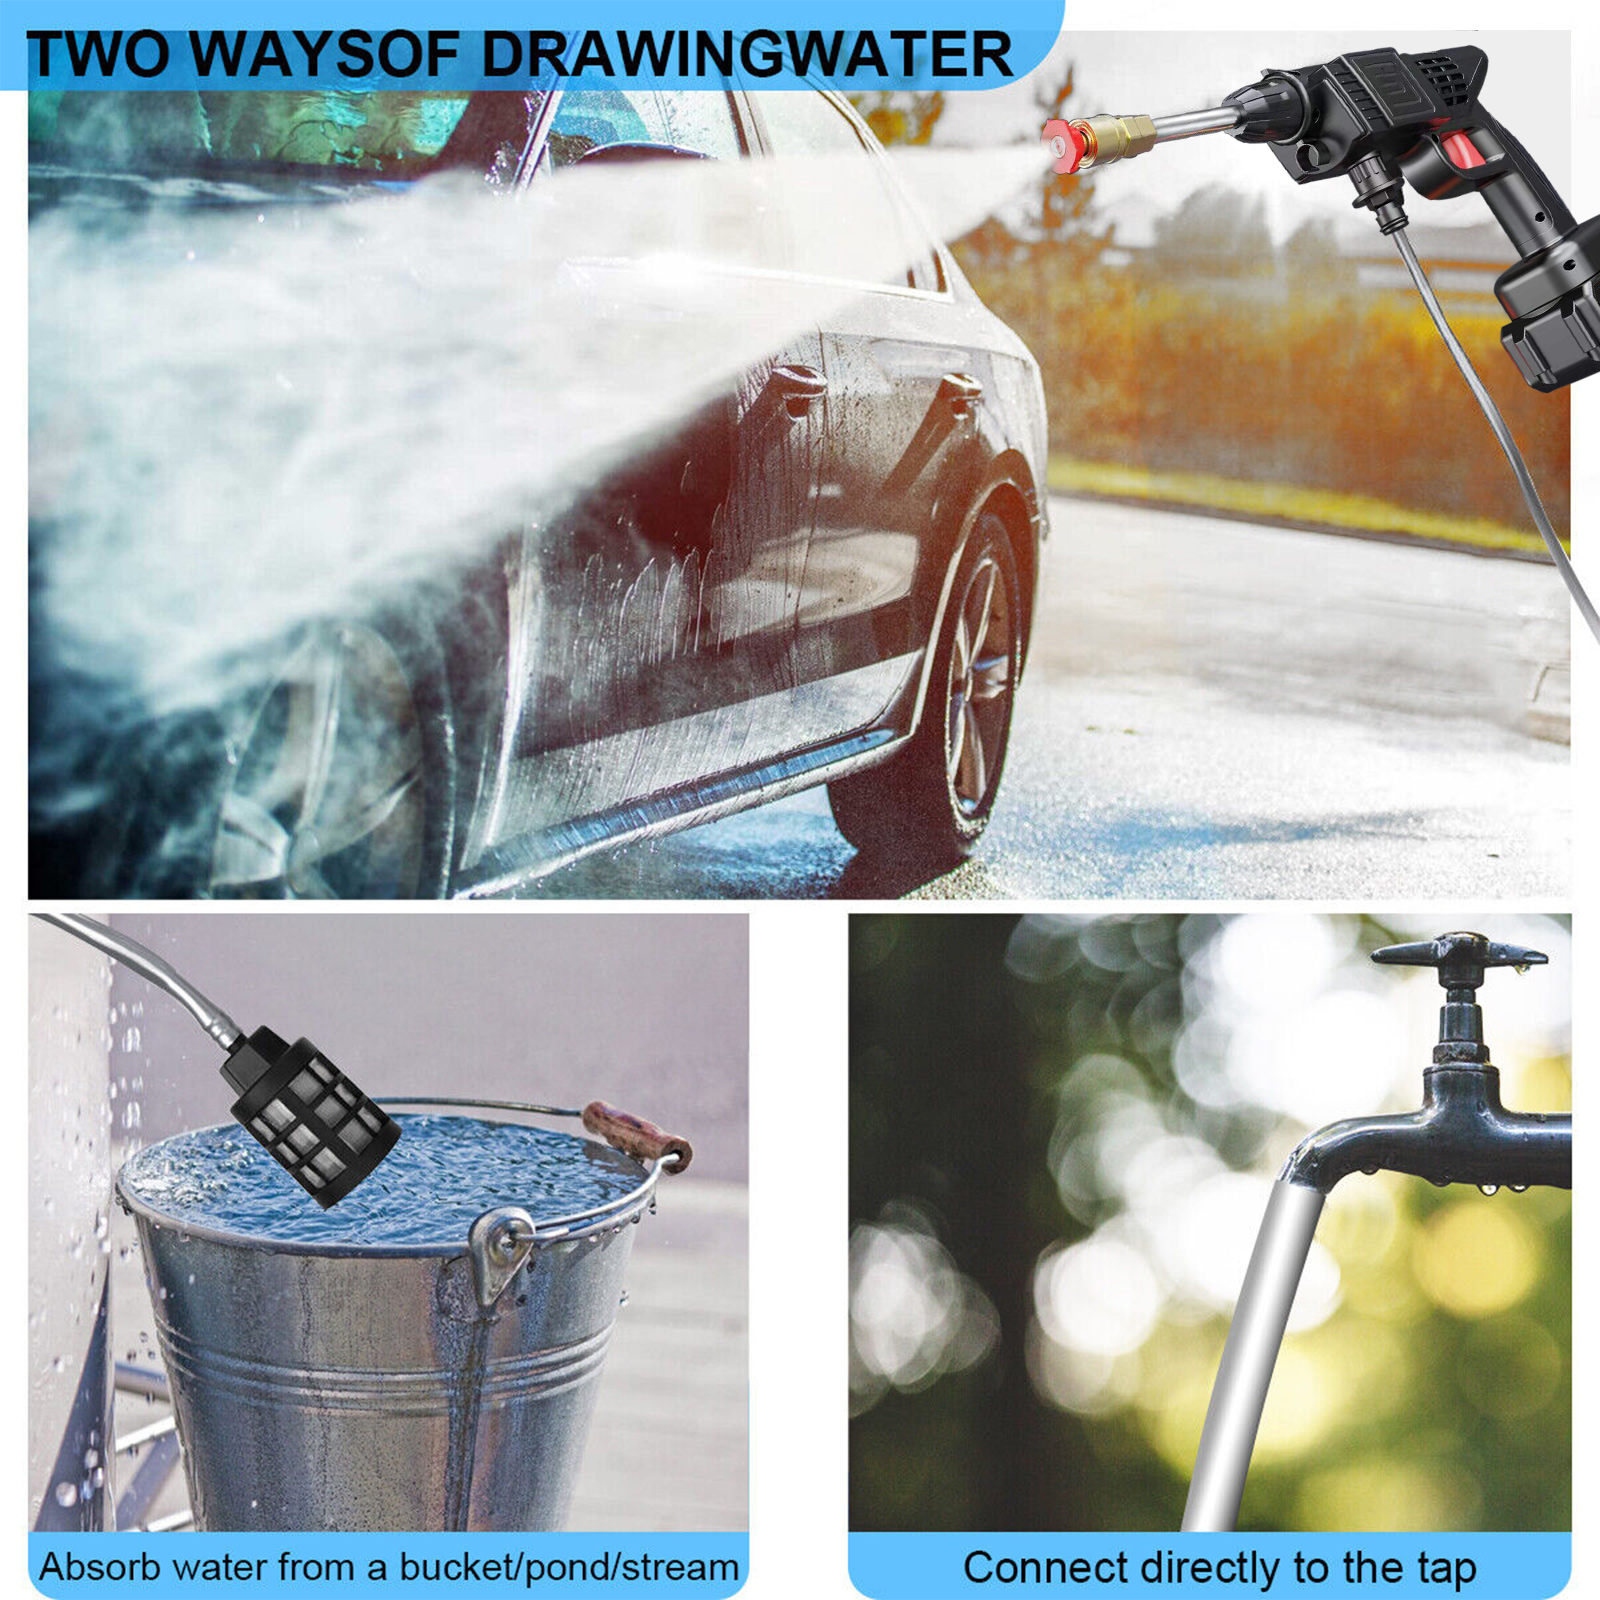 Electric Cordless Pressure Washer, 288VF High Pressure Power Washer, Car  Wash Tool, Pressure Washer Gun with Rechargeable Battery 